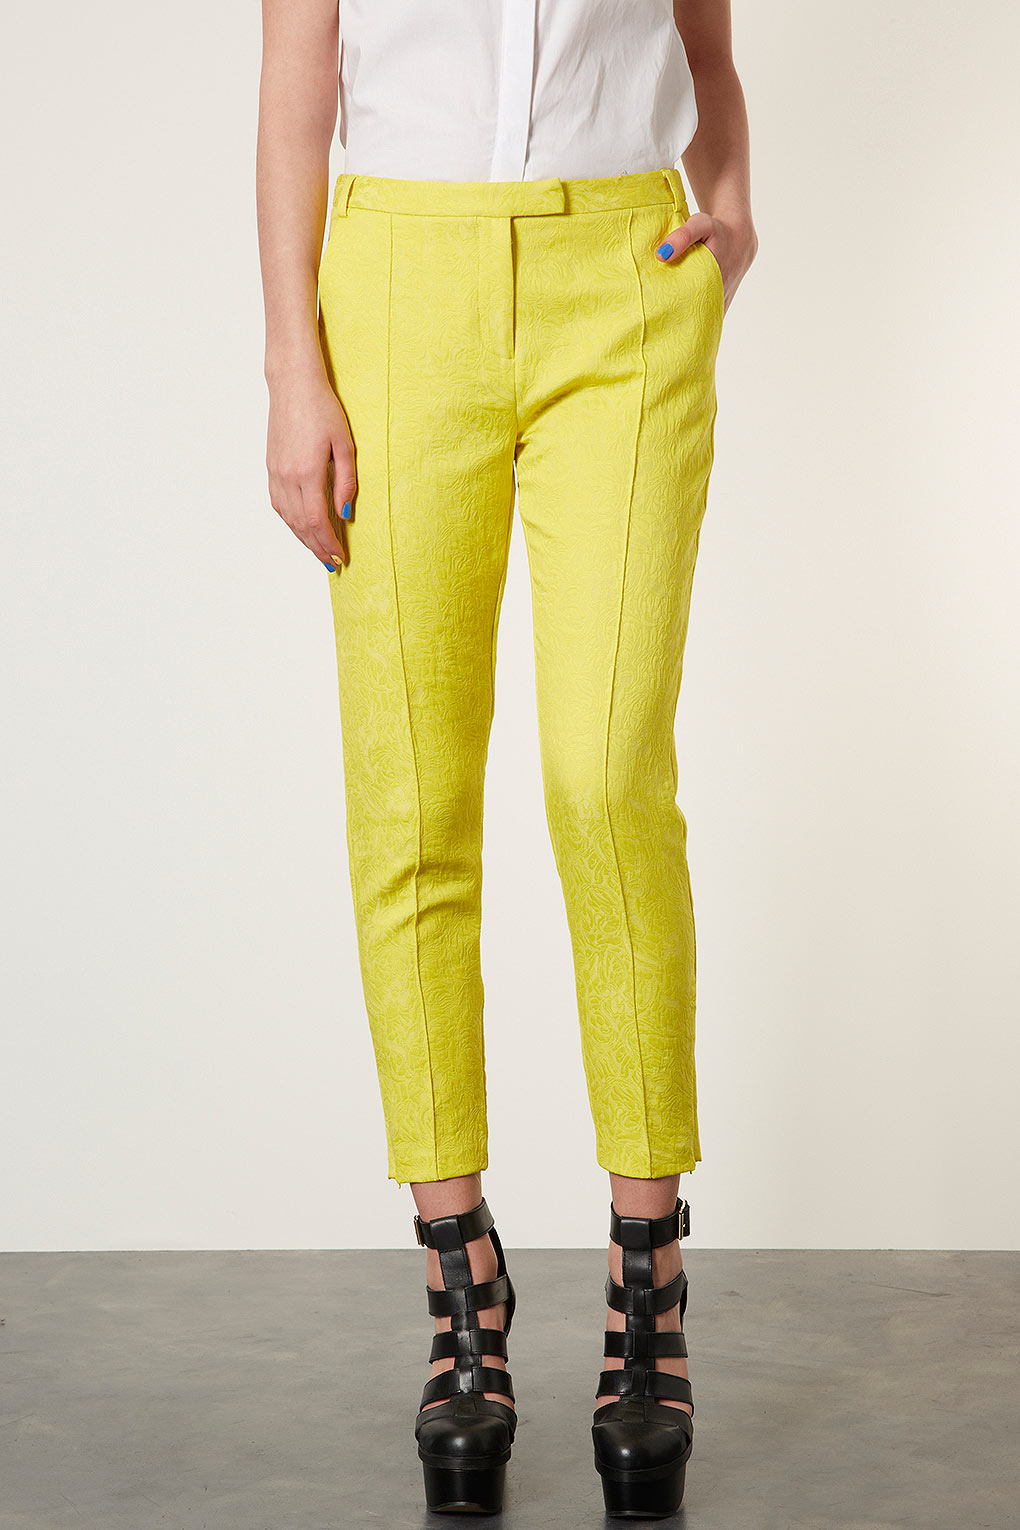 TOPSHOP Jacquard Cigarette Trousers in Yellow - Lyst